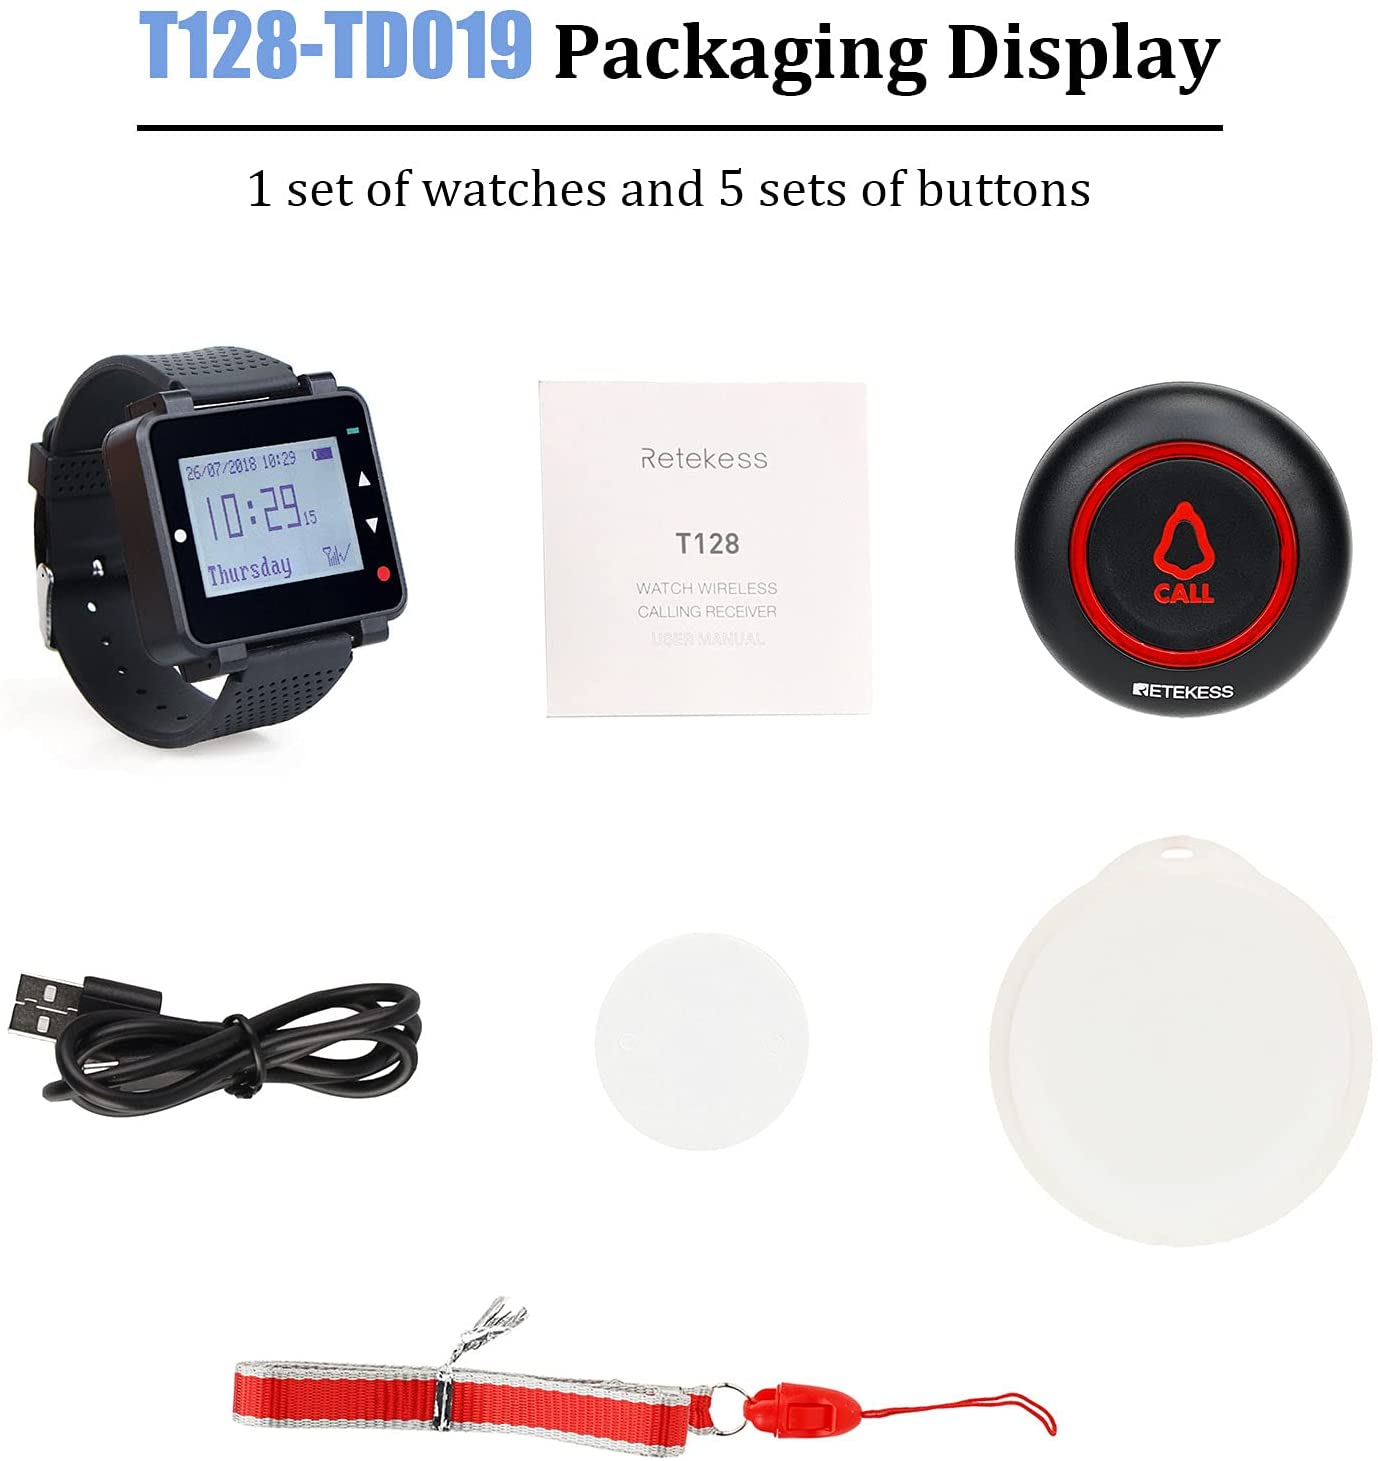 Retekess T128-TD019 Restaurant Pager, Wireless Call System with 3 Reminder Modes, One-Key Call Button 600mAh Built-in Battery for Restaurants, Bars